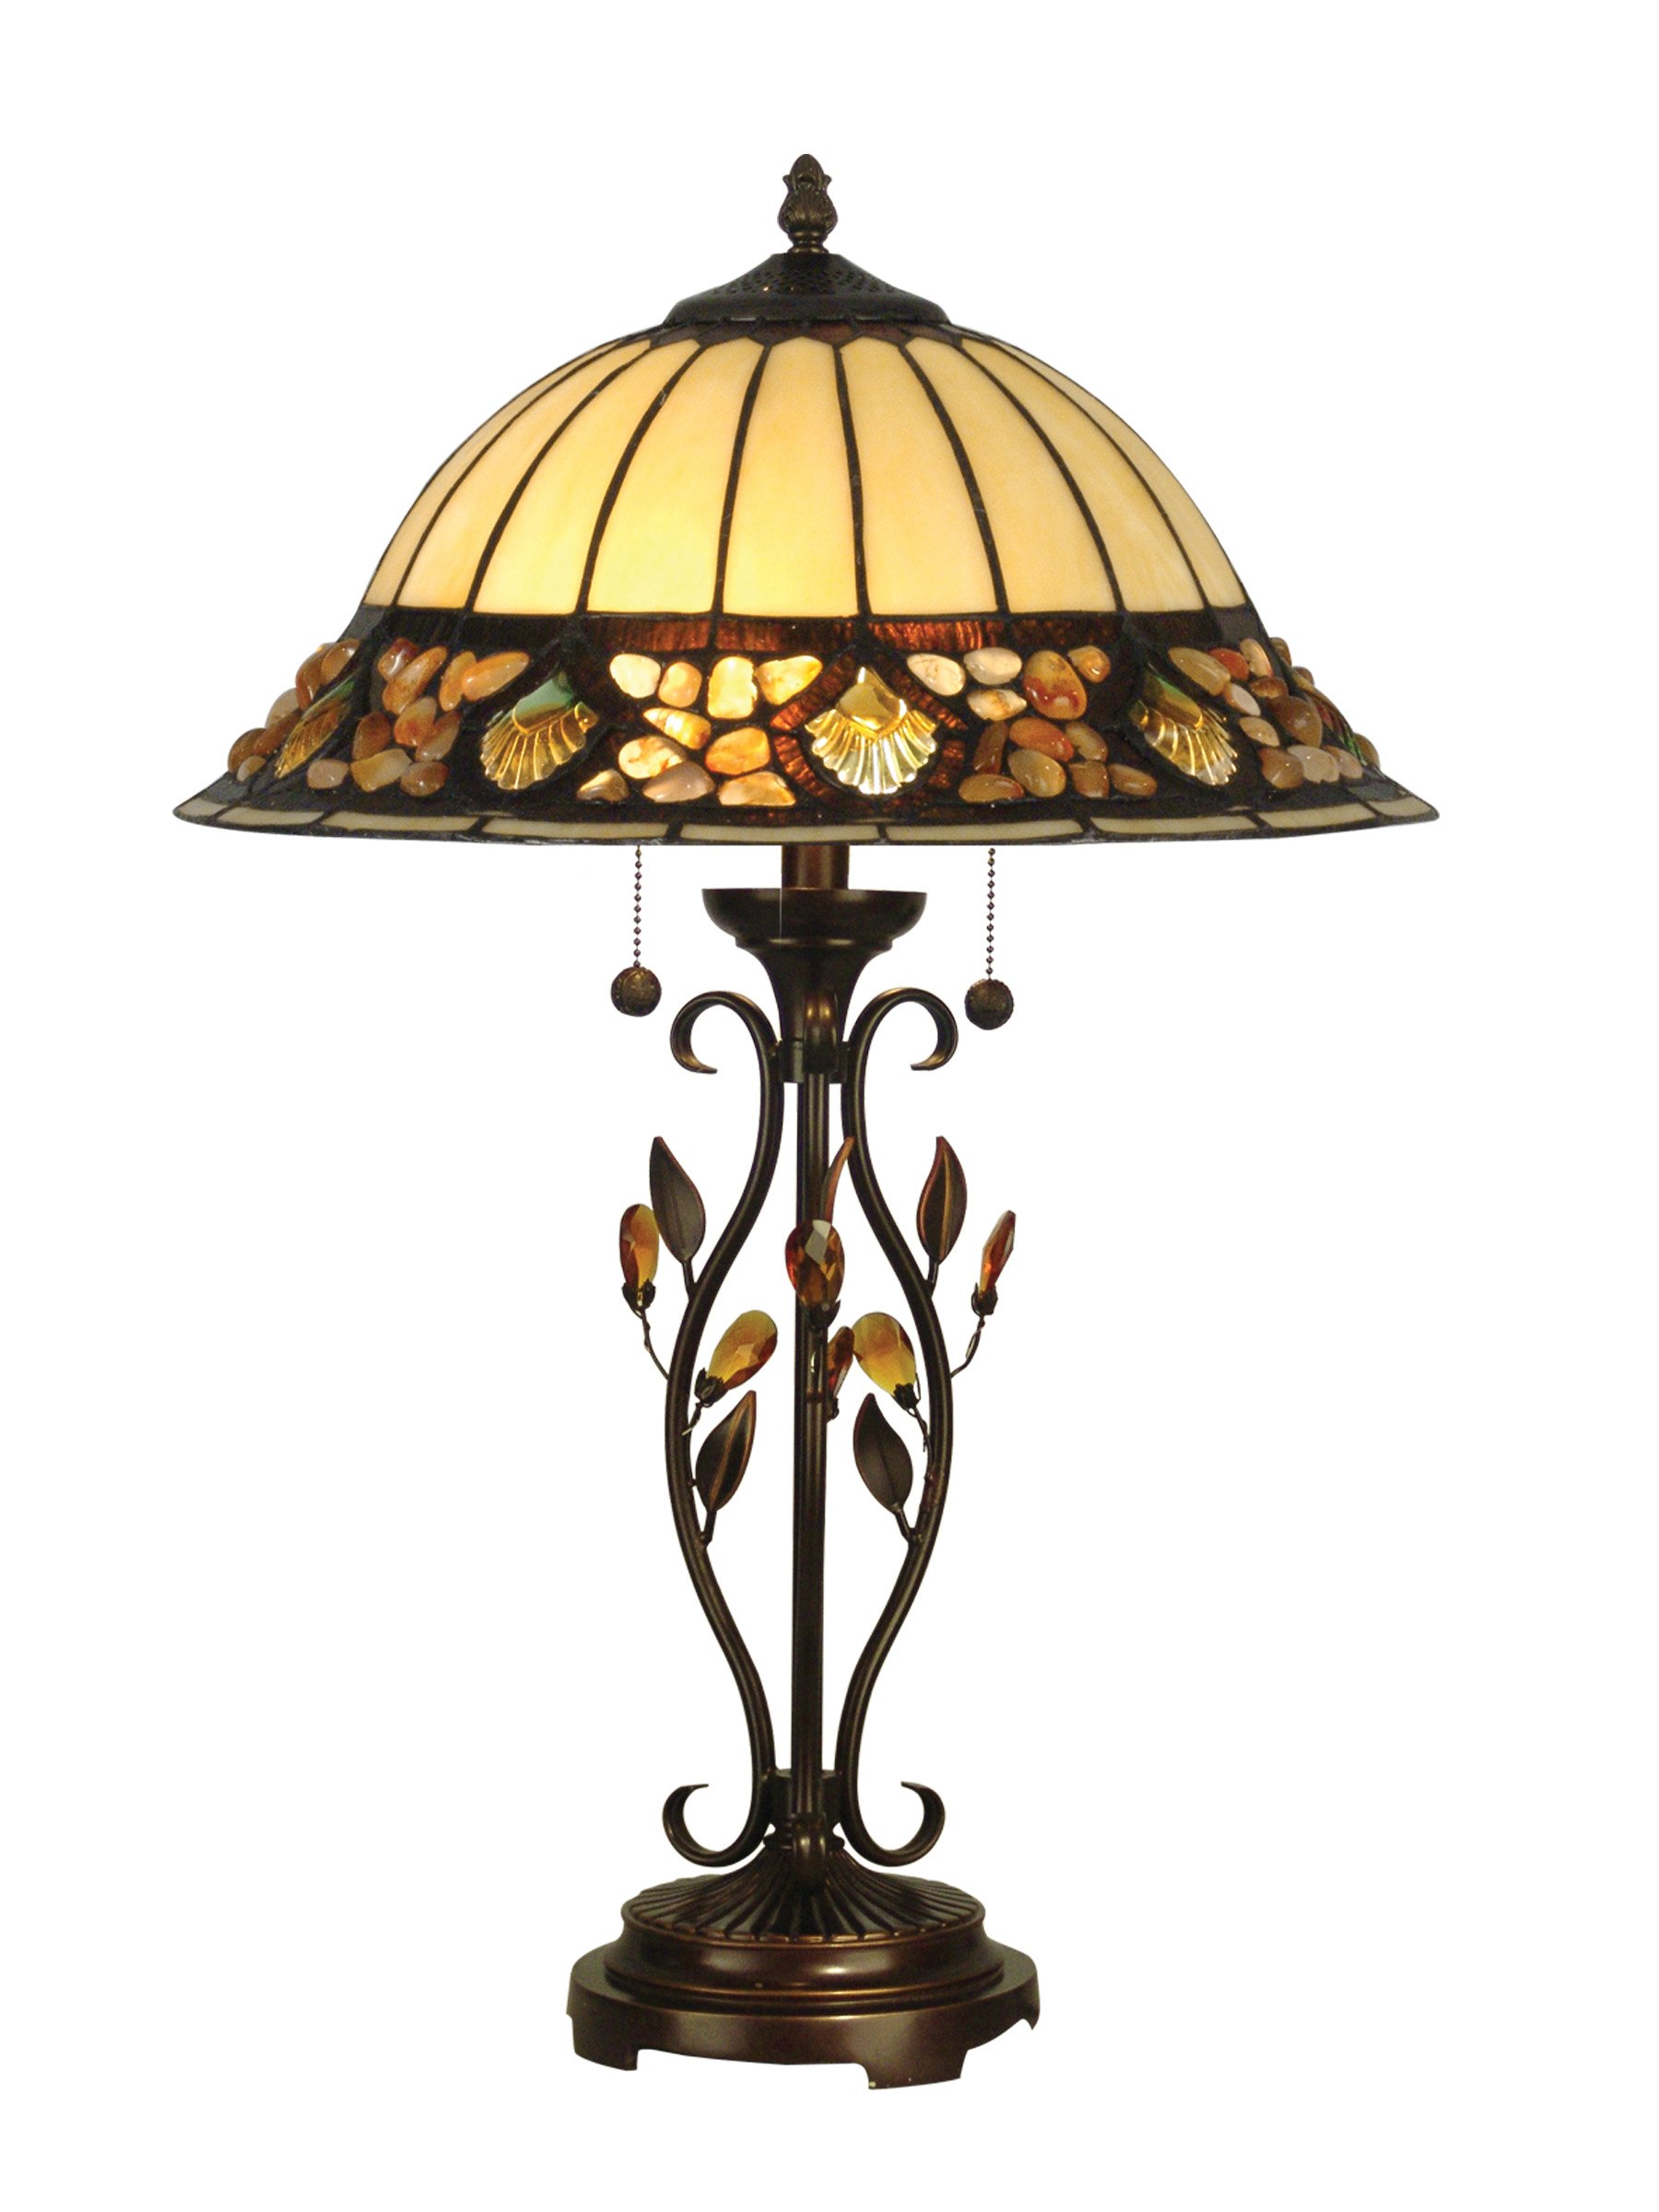 Dale Tiffany TT90172 Pebblestone Table Lamp, Antique Golden Sand and Art Glass Shade 27.00x16.00x16.00